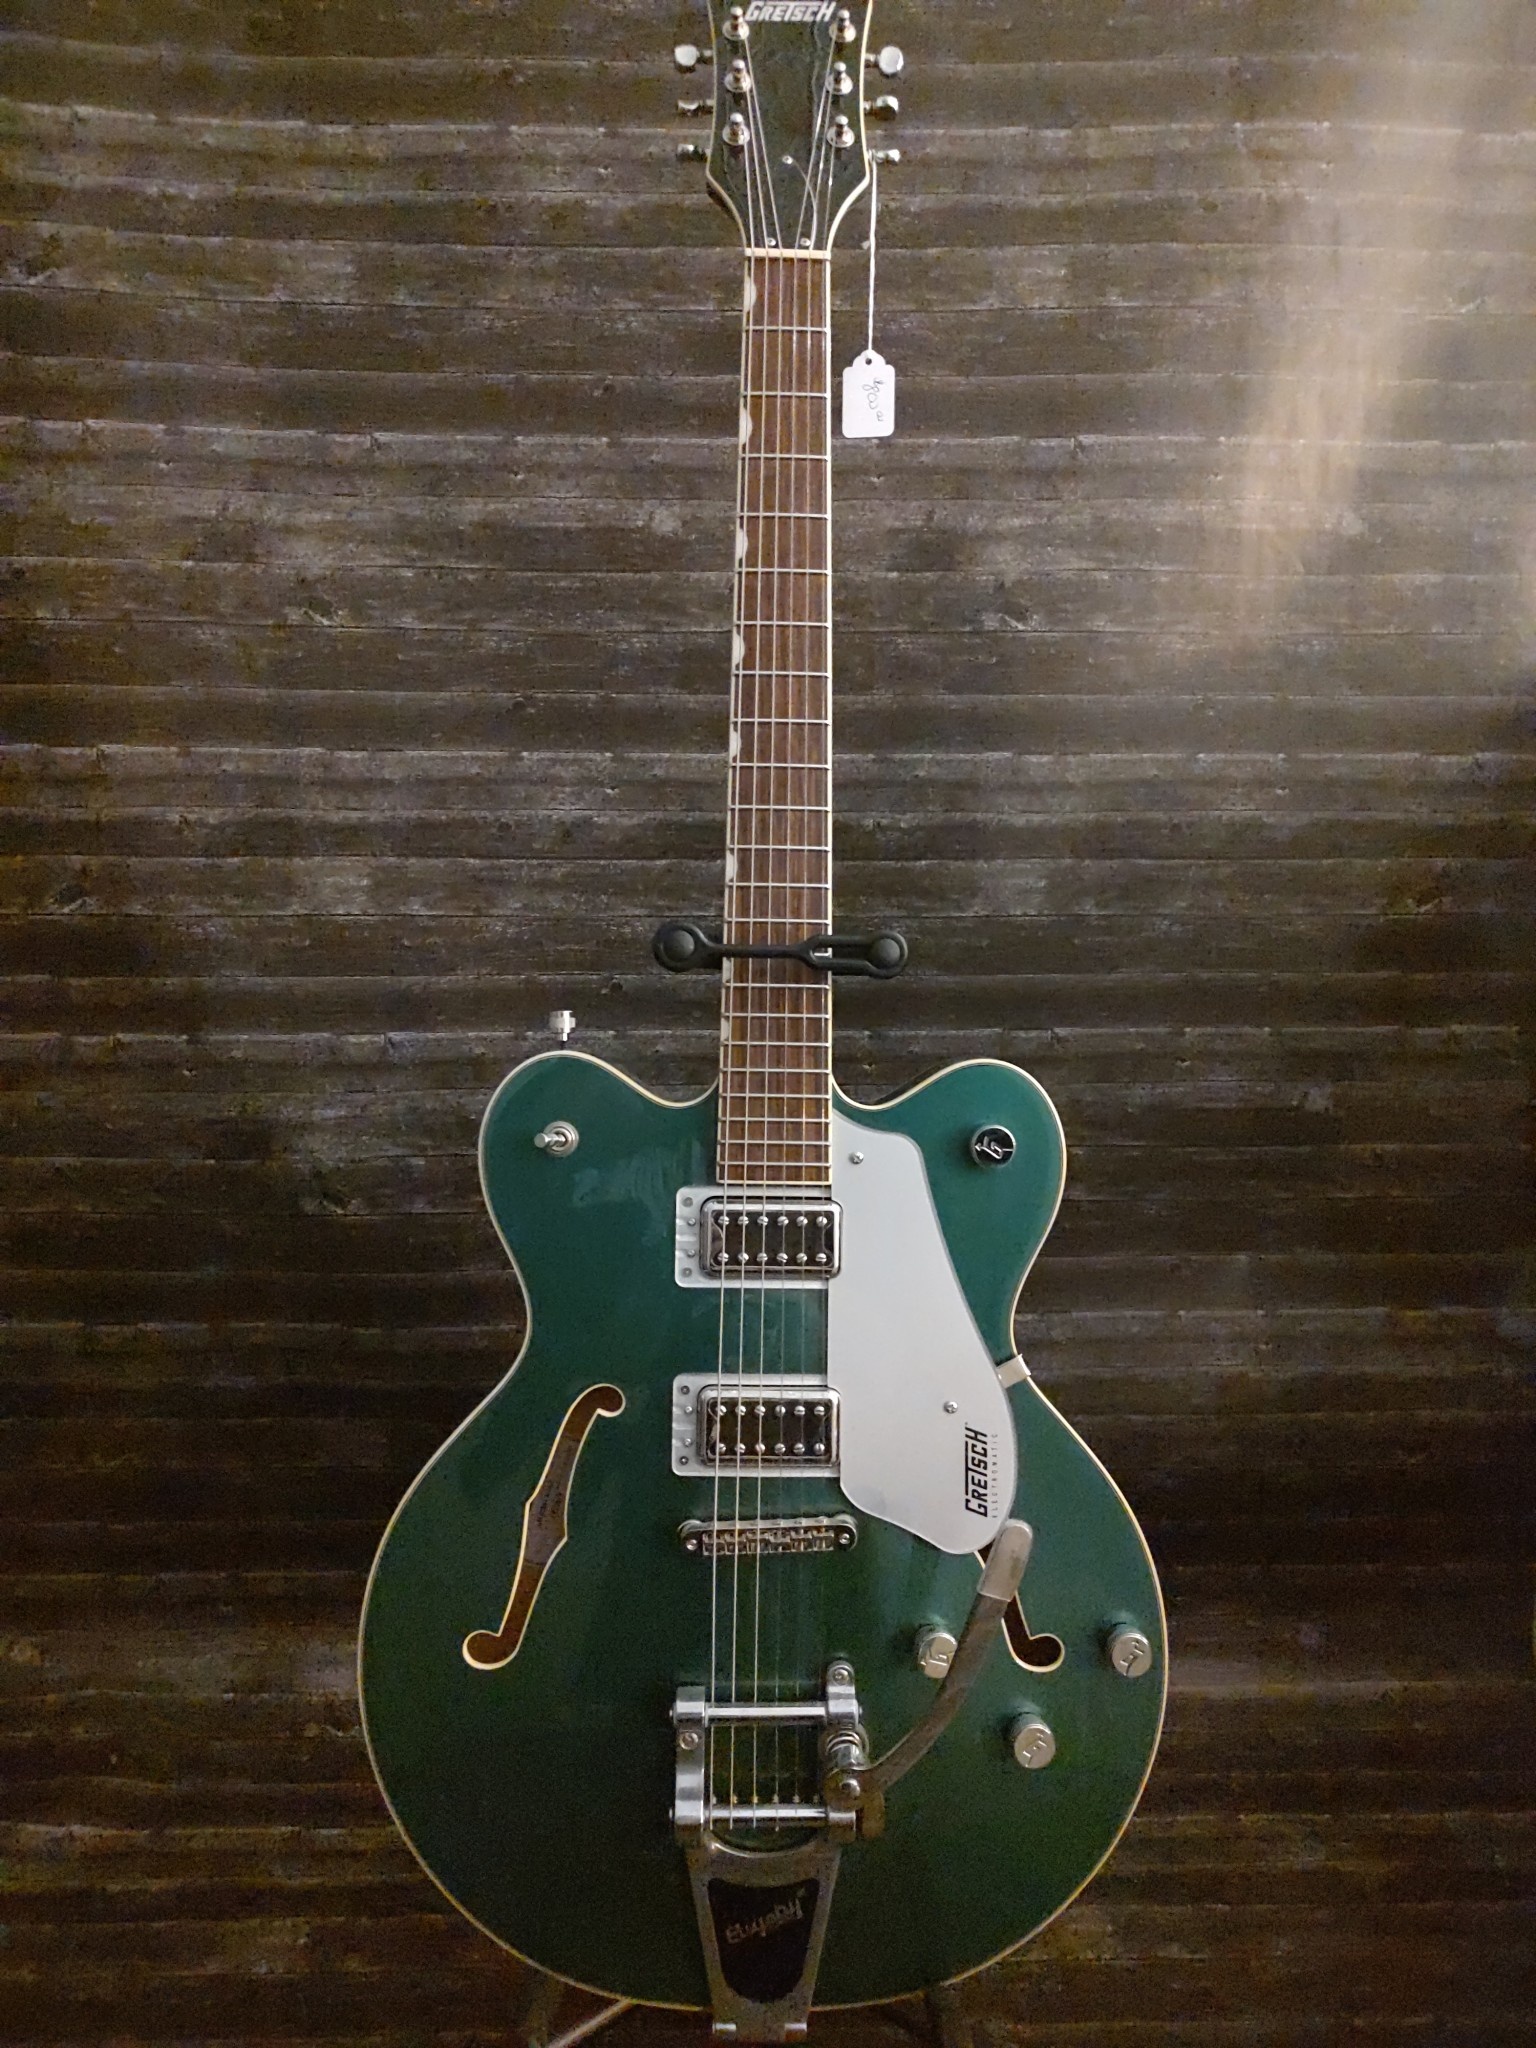 Gretsch G5622t Hollow Body with Bigsby